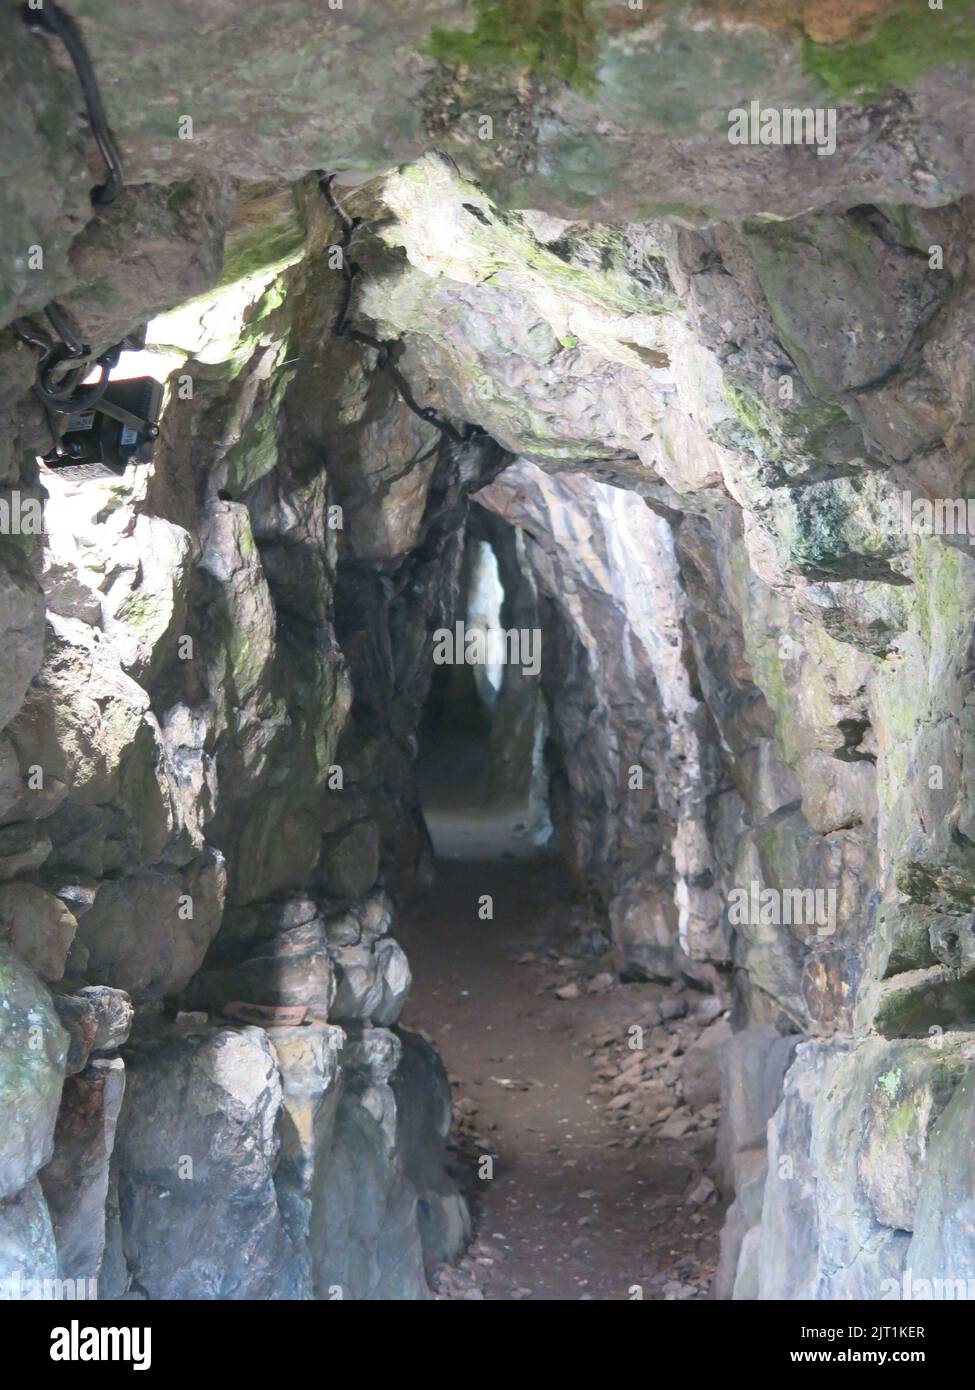 View inside the adit, or horizontal rock tunnel, which visitors can walk through for some distance at the Old Lead Mine, Cascades Gardens, Derbyshire. Stock Photo